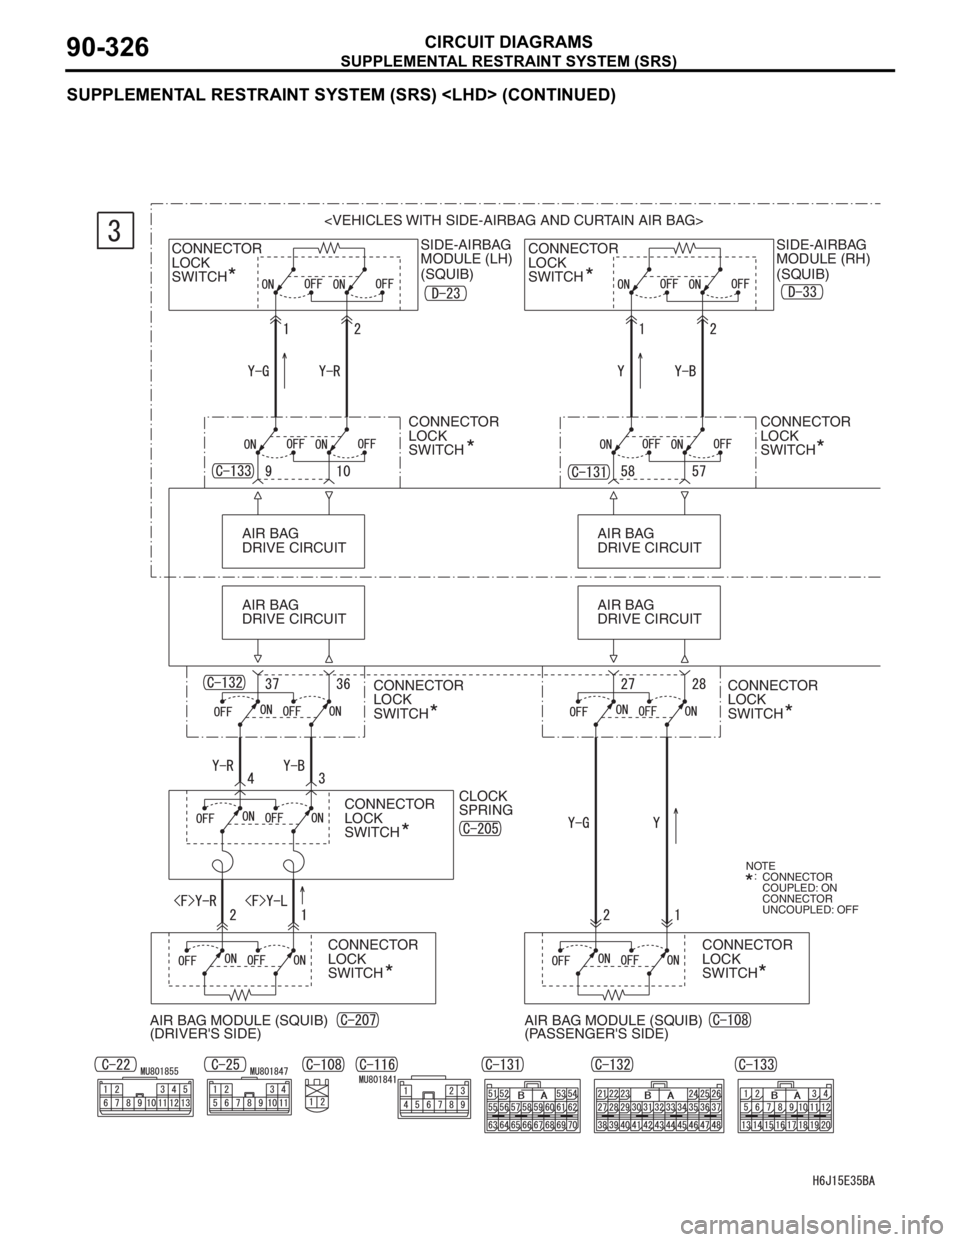 MITSUBISHI LANCER 2006  Workshop Manual SUPPLEMENTAL RESTRAINT SYSTEM (SRS)
CIRCUIT DIAGRAMS90-326
SUPPLEMENTAL RESTRAINT SYSTEM (SRS) <LHD> (CONTINUED)
<VEHICLES WITH SIDE-AIRBAG AND CURTAIN AIR BAG>
SIDE-AIRBAG 
MODULE (RH)
(SQUIB) CONNEC